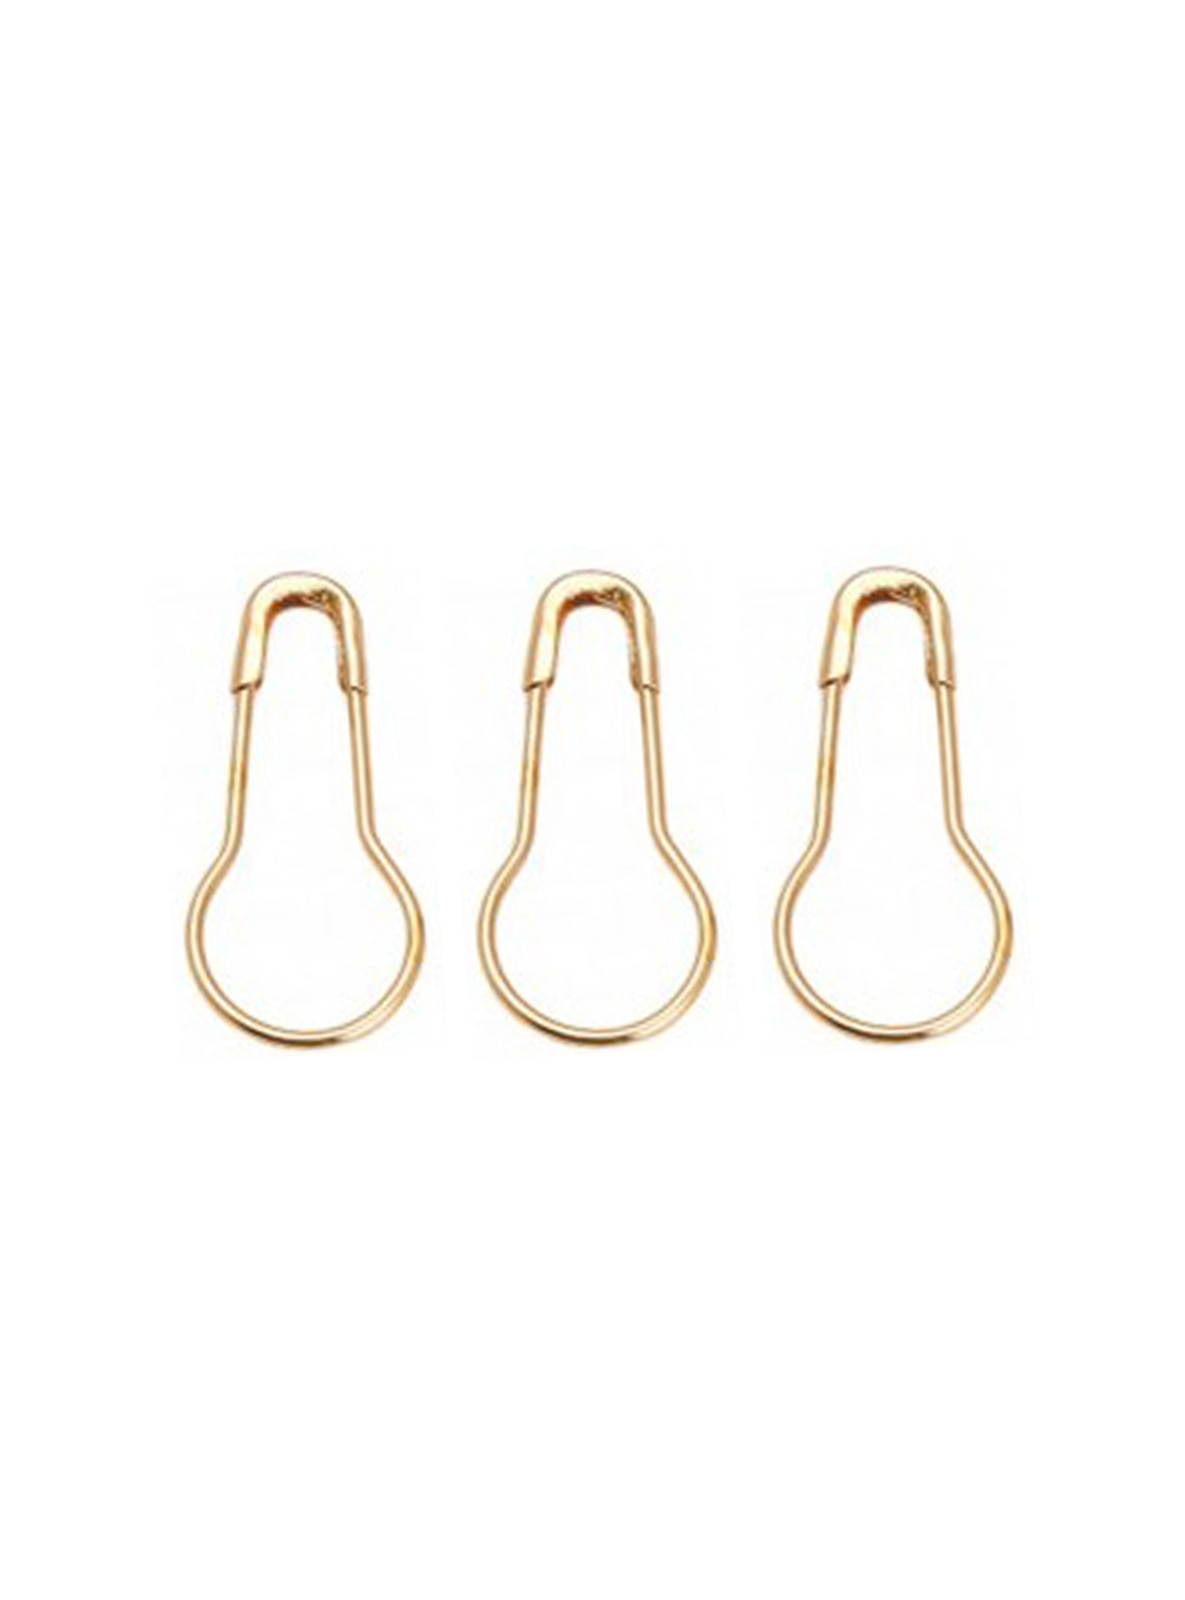 20-Piece Pear Shaped Hijab Pin Set - Gold Color